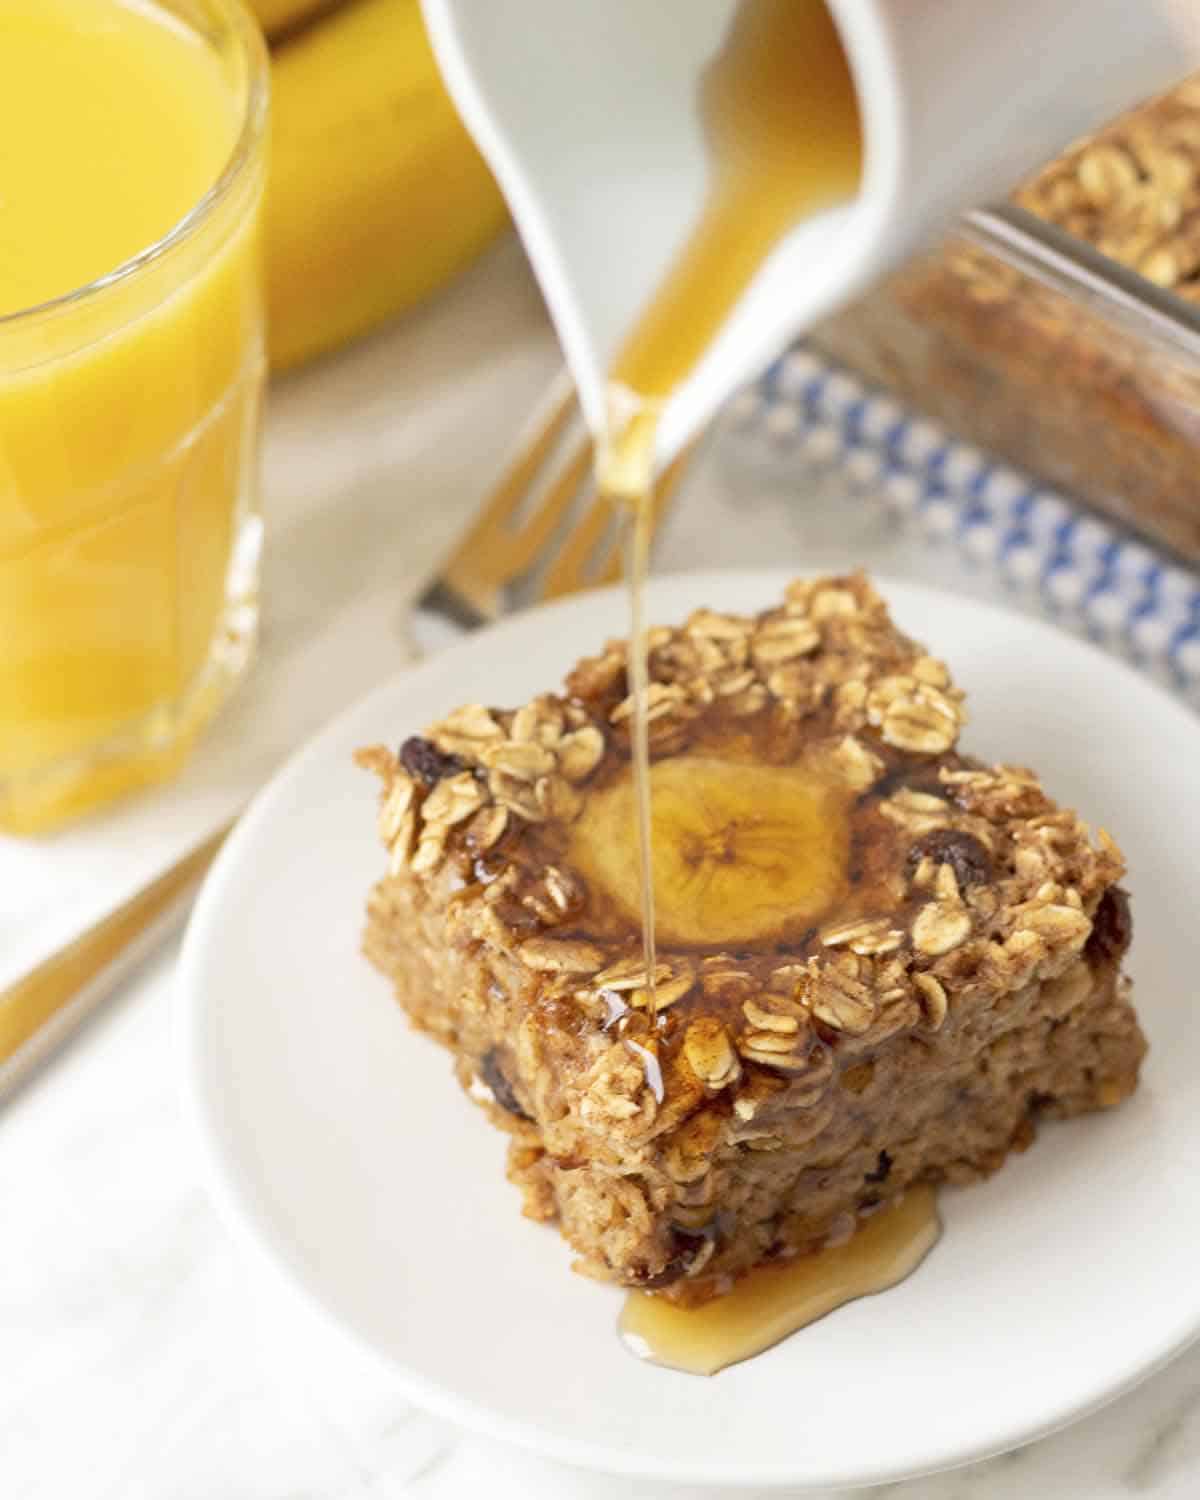 A slice of vegan banana baked oatmeal on a white plate, syrup is being poured onto the oatmeal.